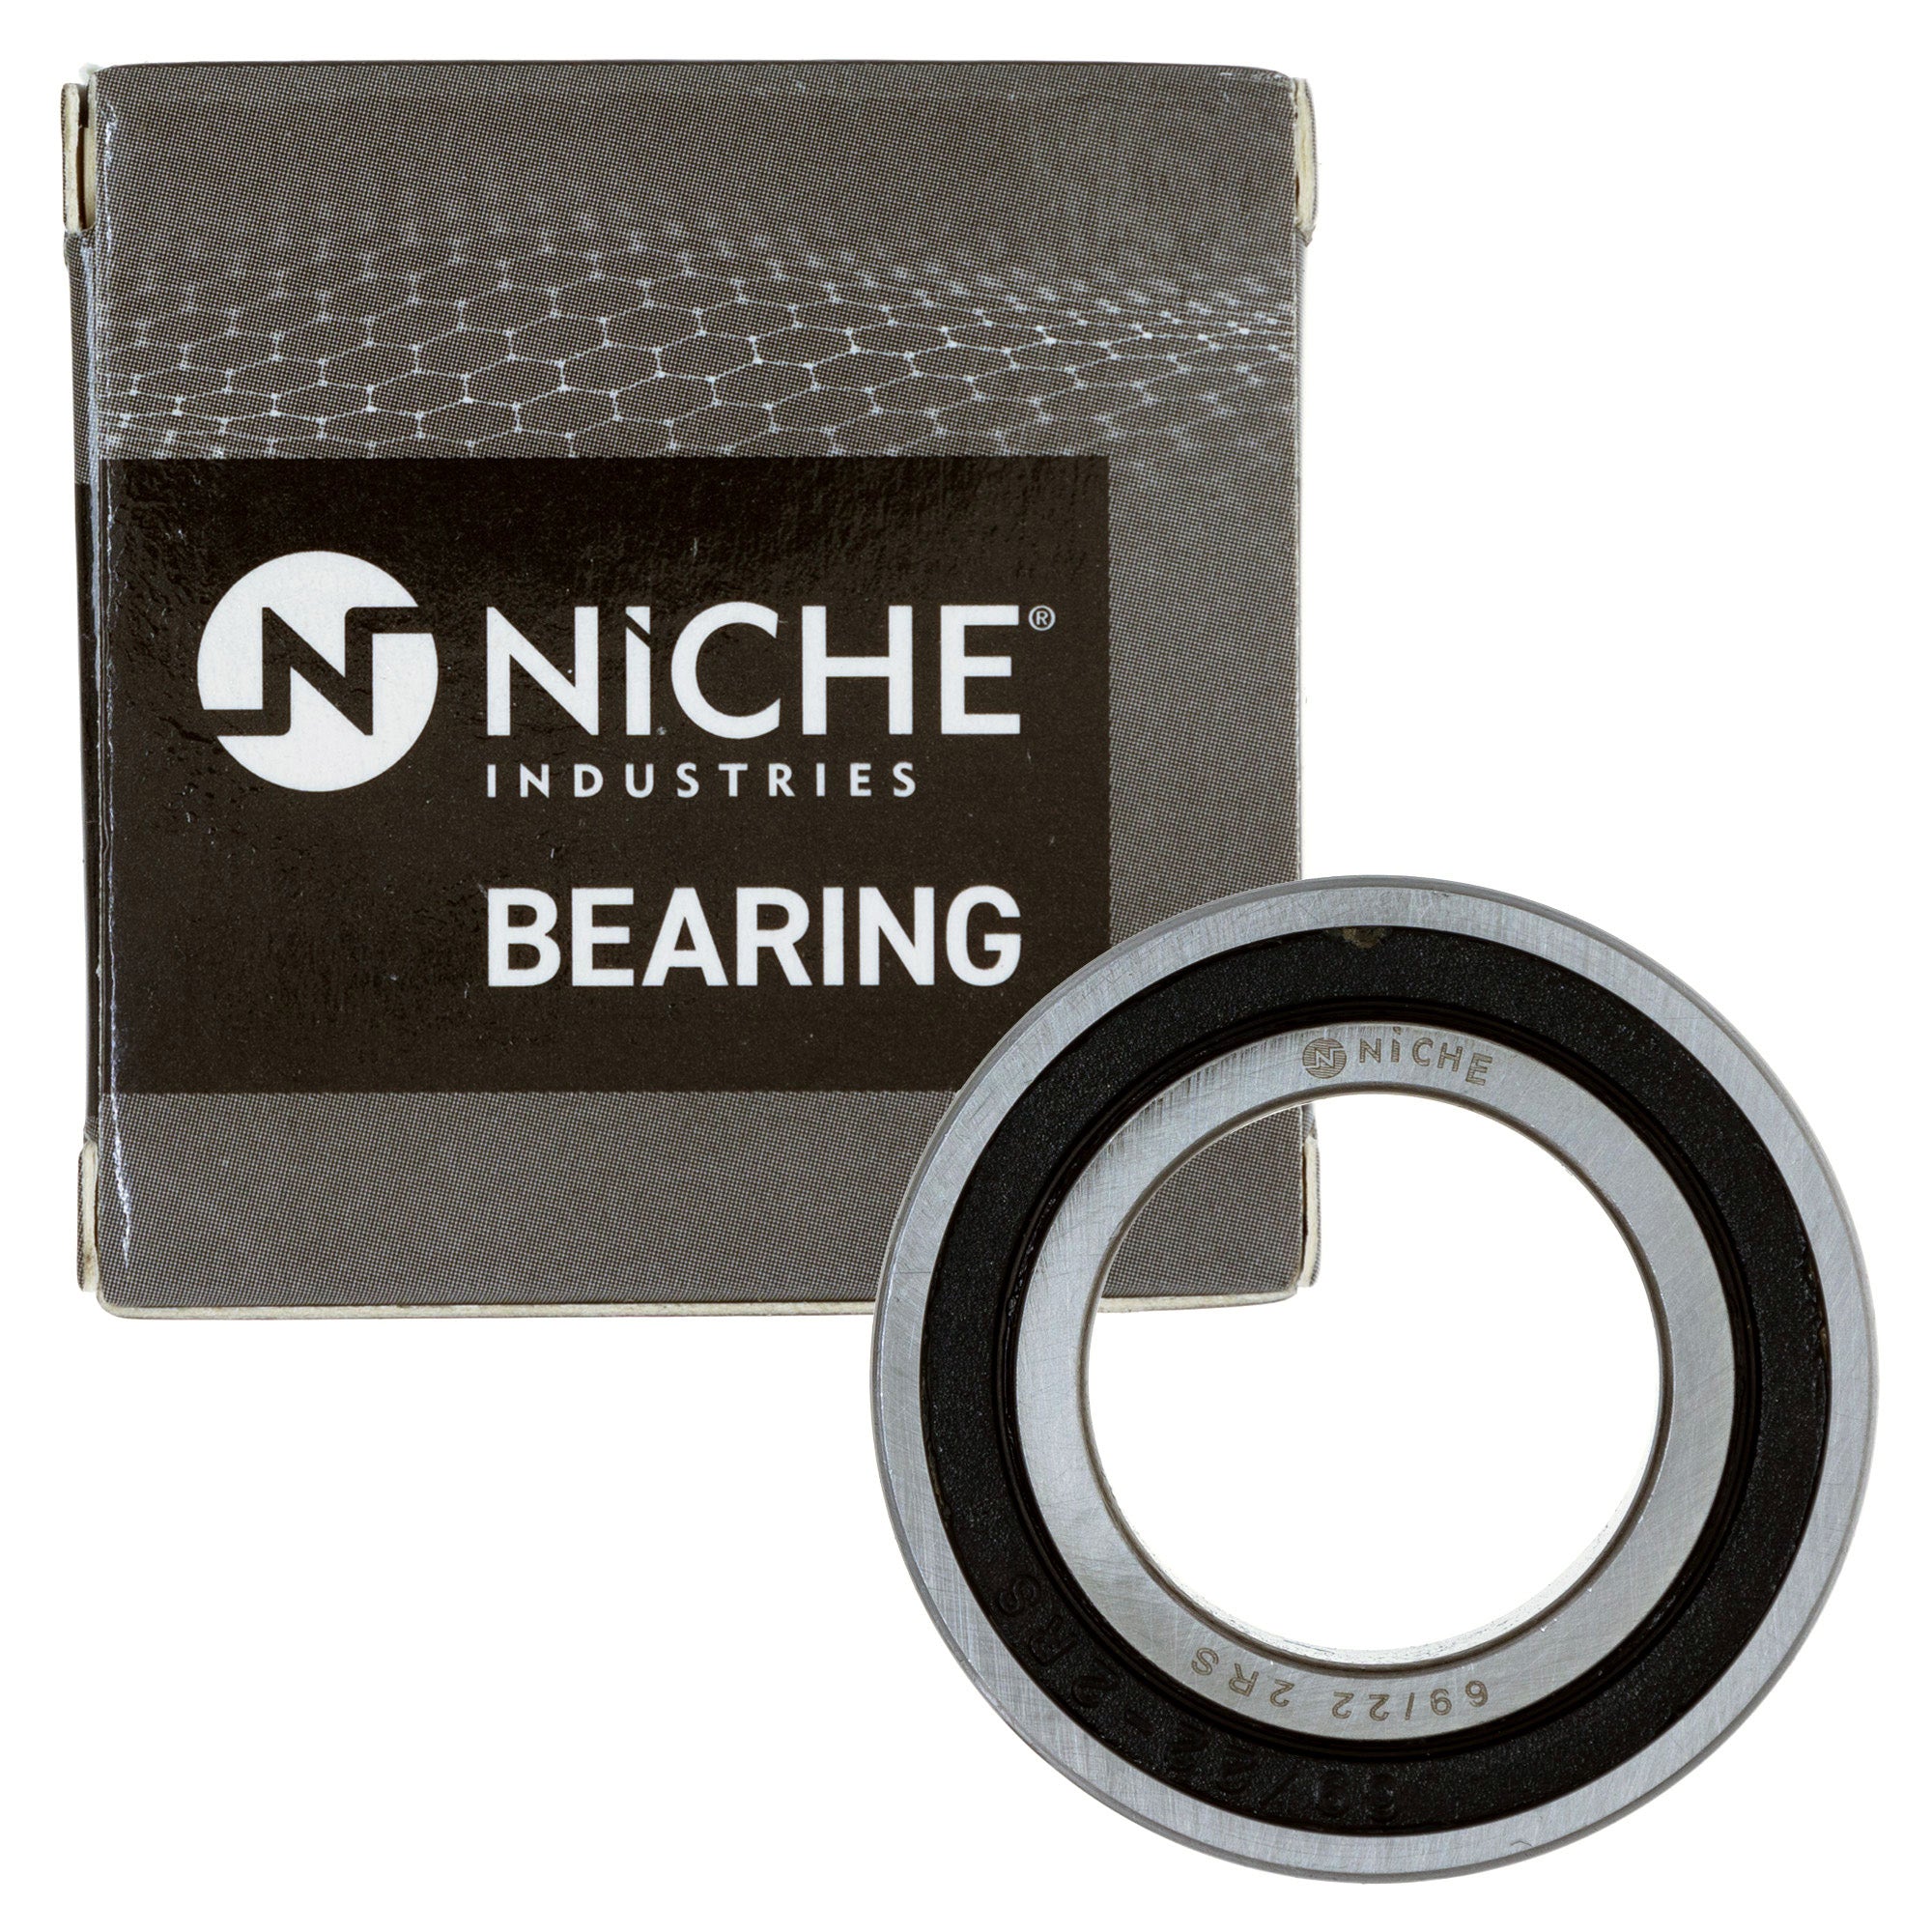 NICHE MK1009178 Wheel Bearing Seal Kit for zOTHER YZ450FX YZ450F